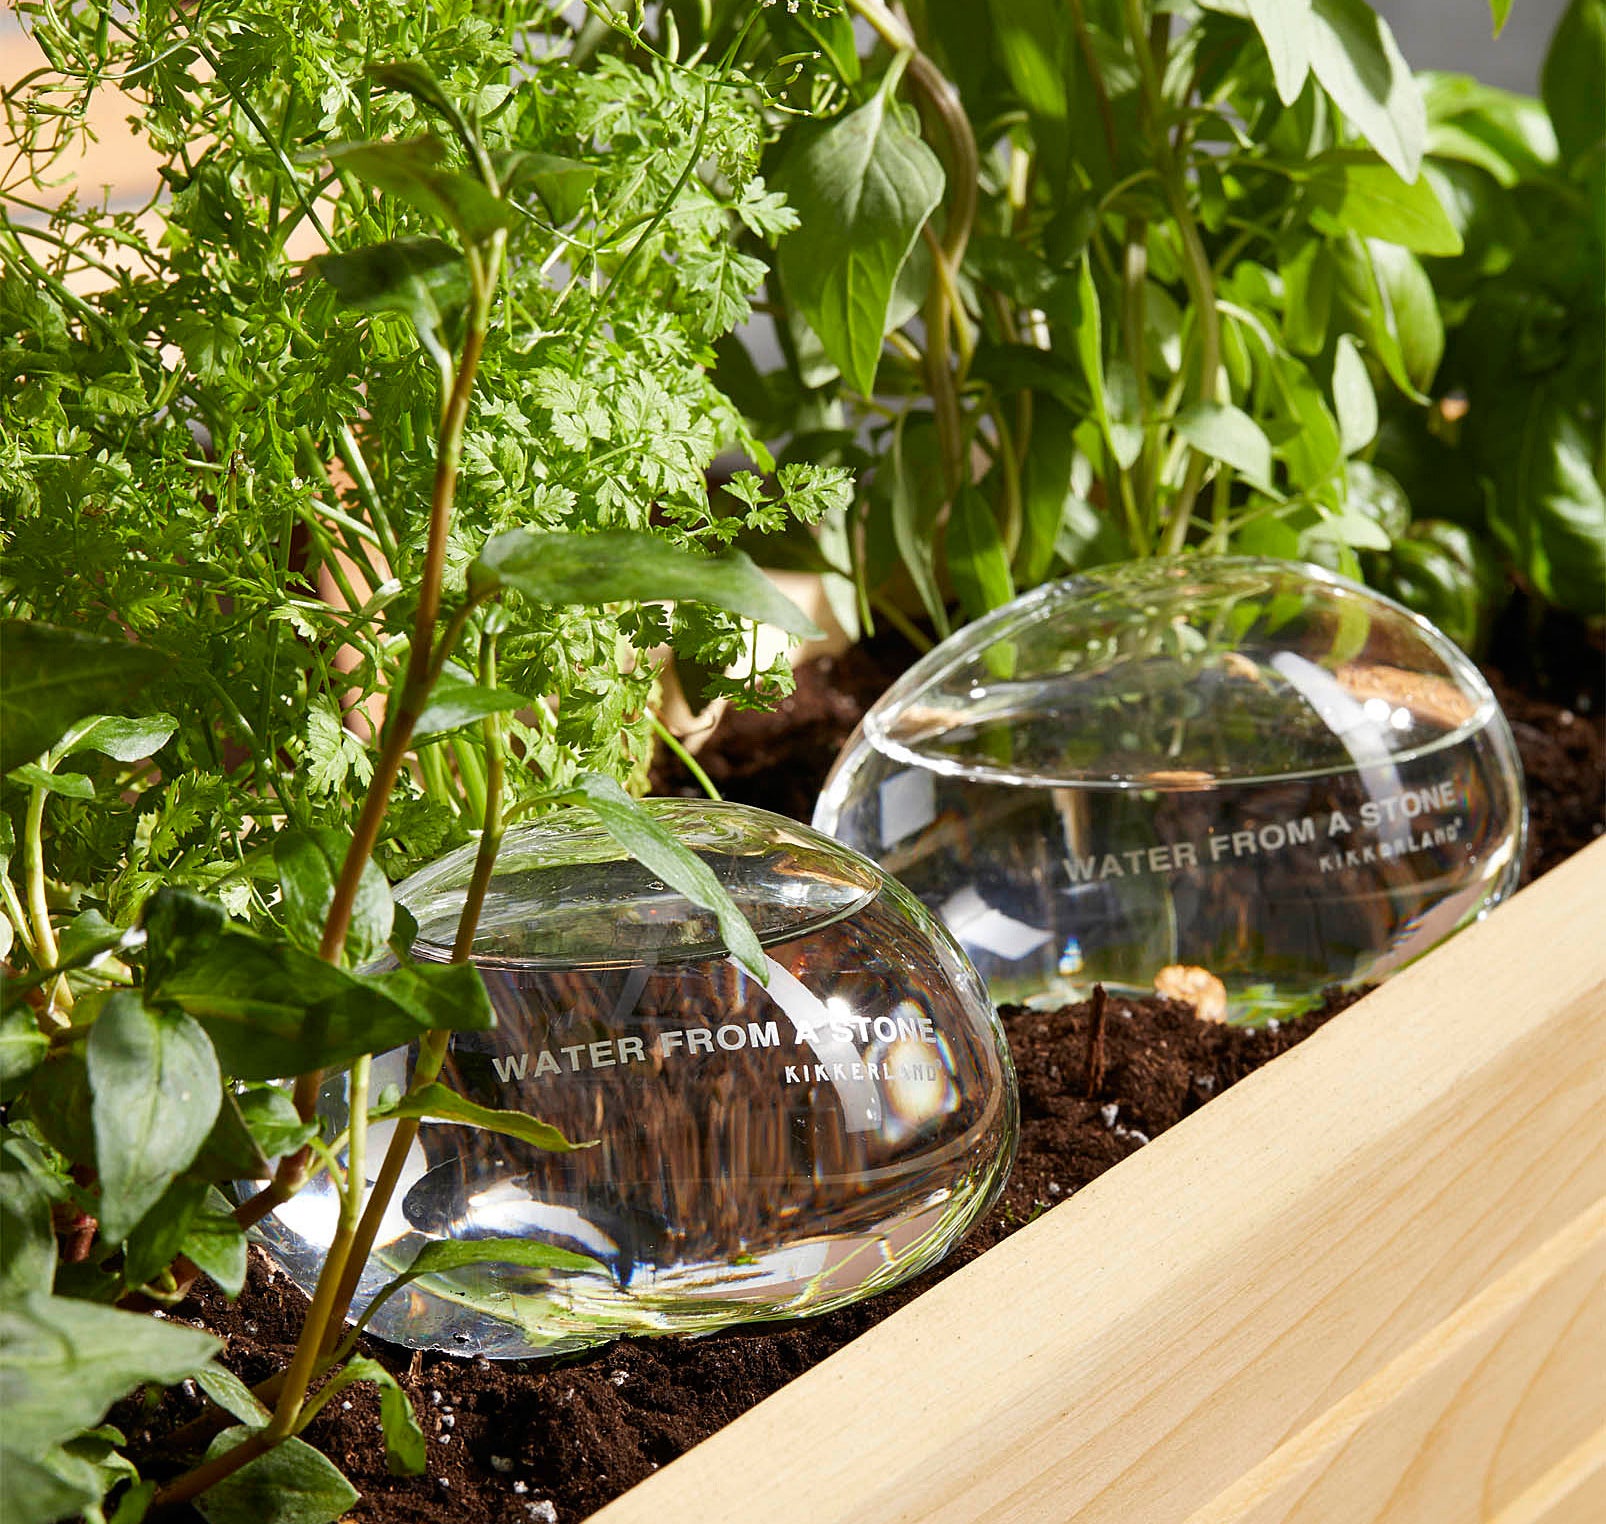 Two glass globes sitting in a bed of plants